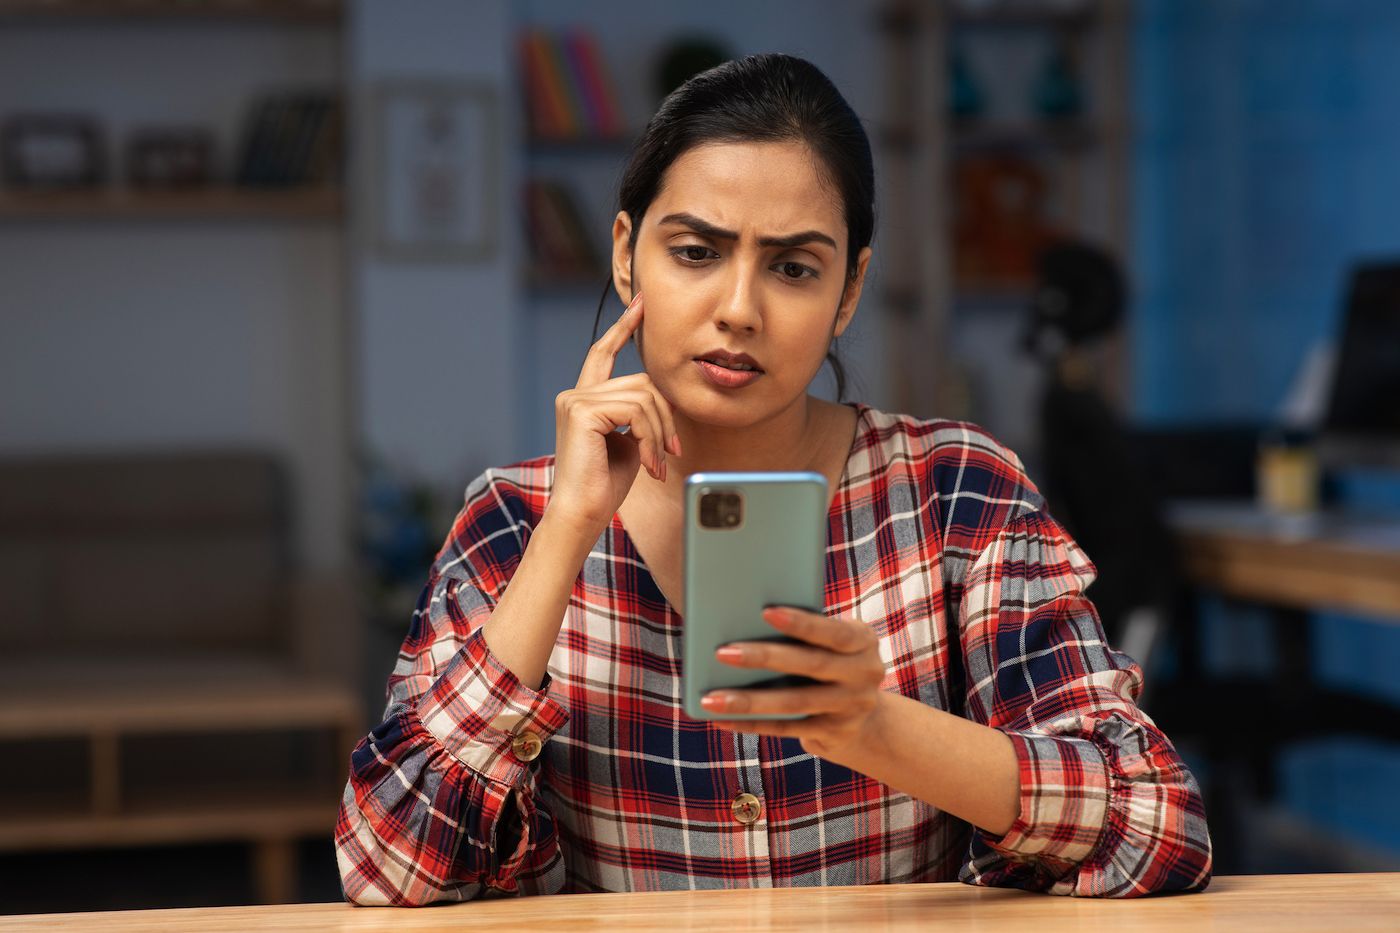 https://s28126.pcdn.co/blogs/ask-experian/wp-content/uploads/woman-staring-at-phone-with-concern.jpg.optimal.jpg